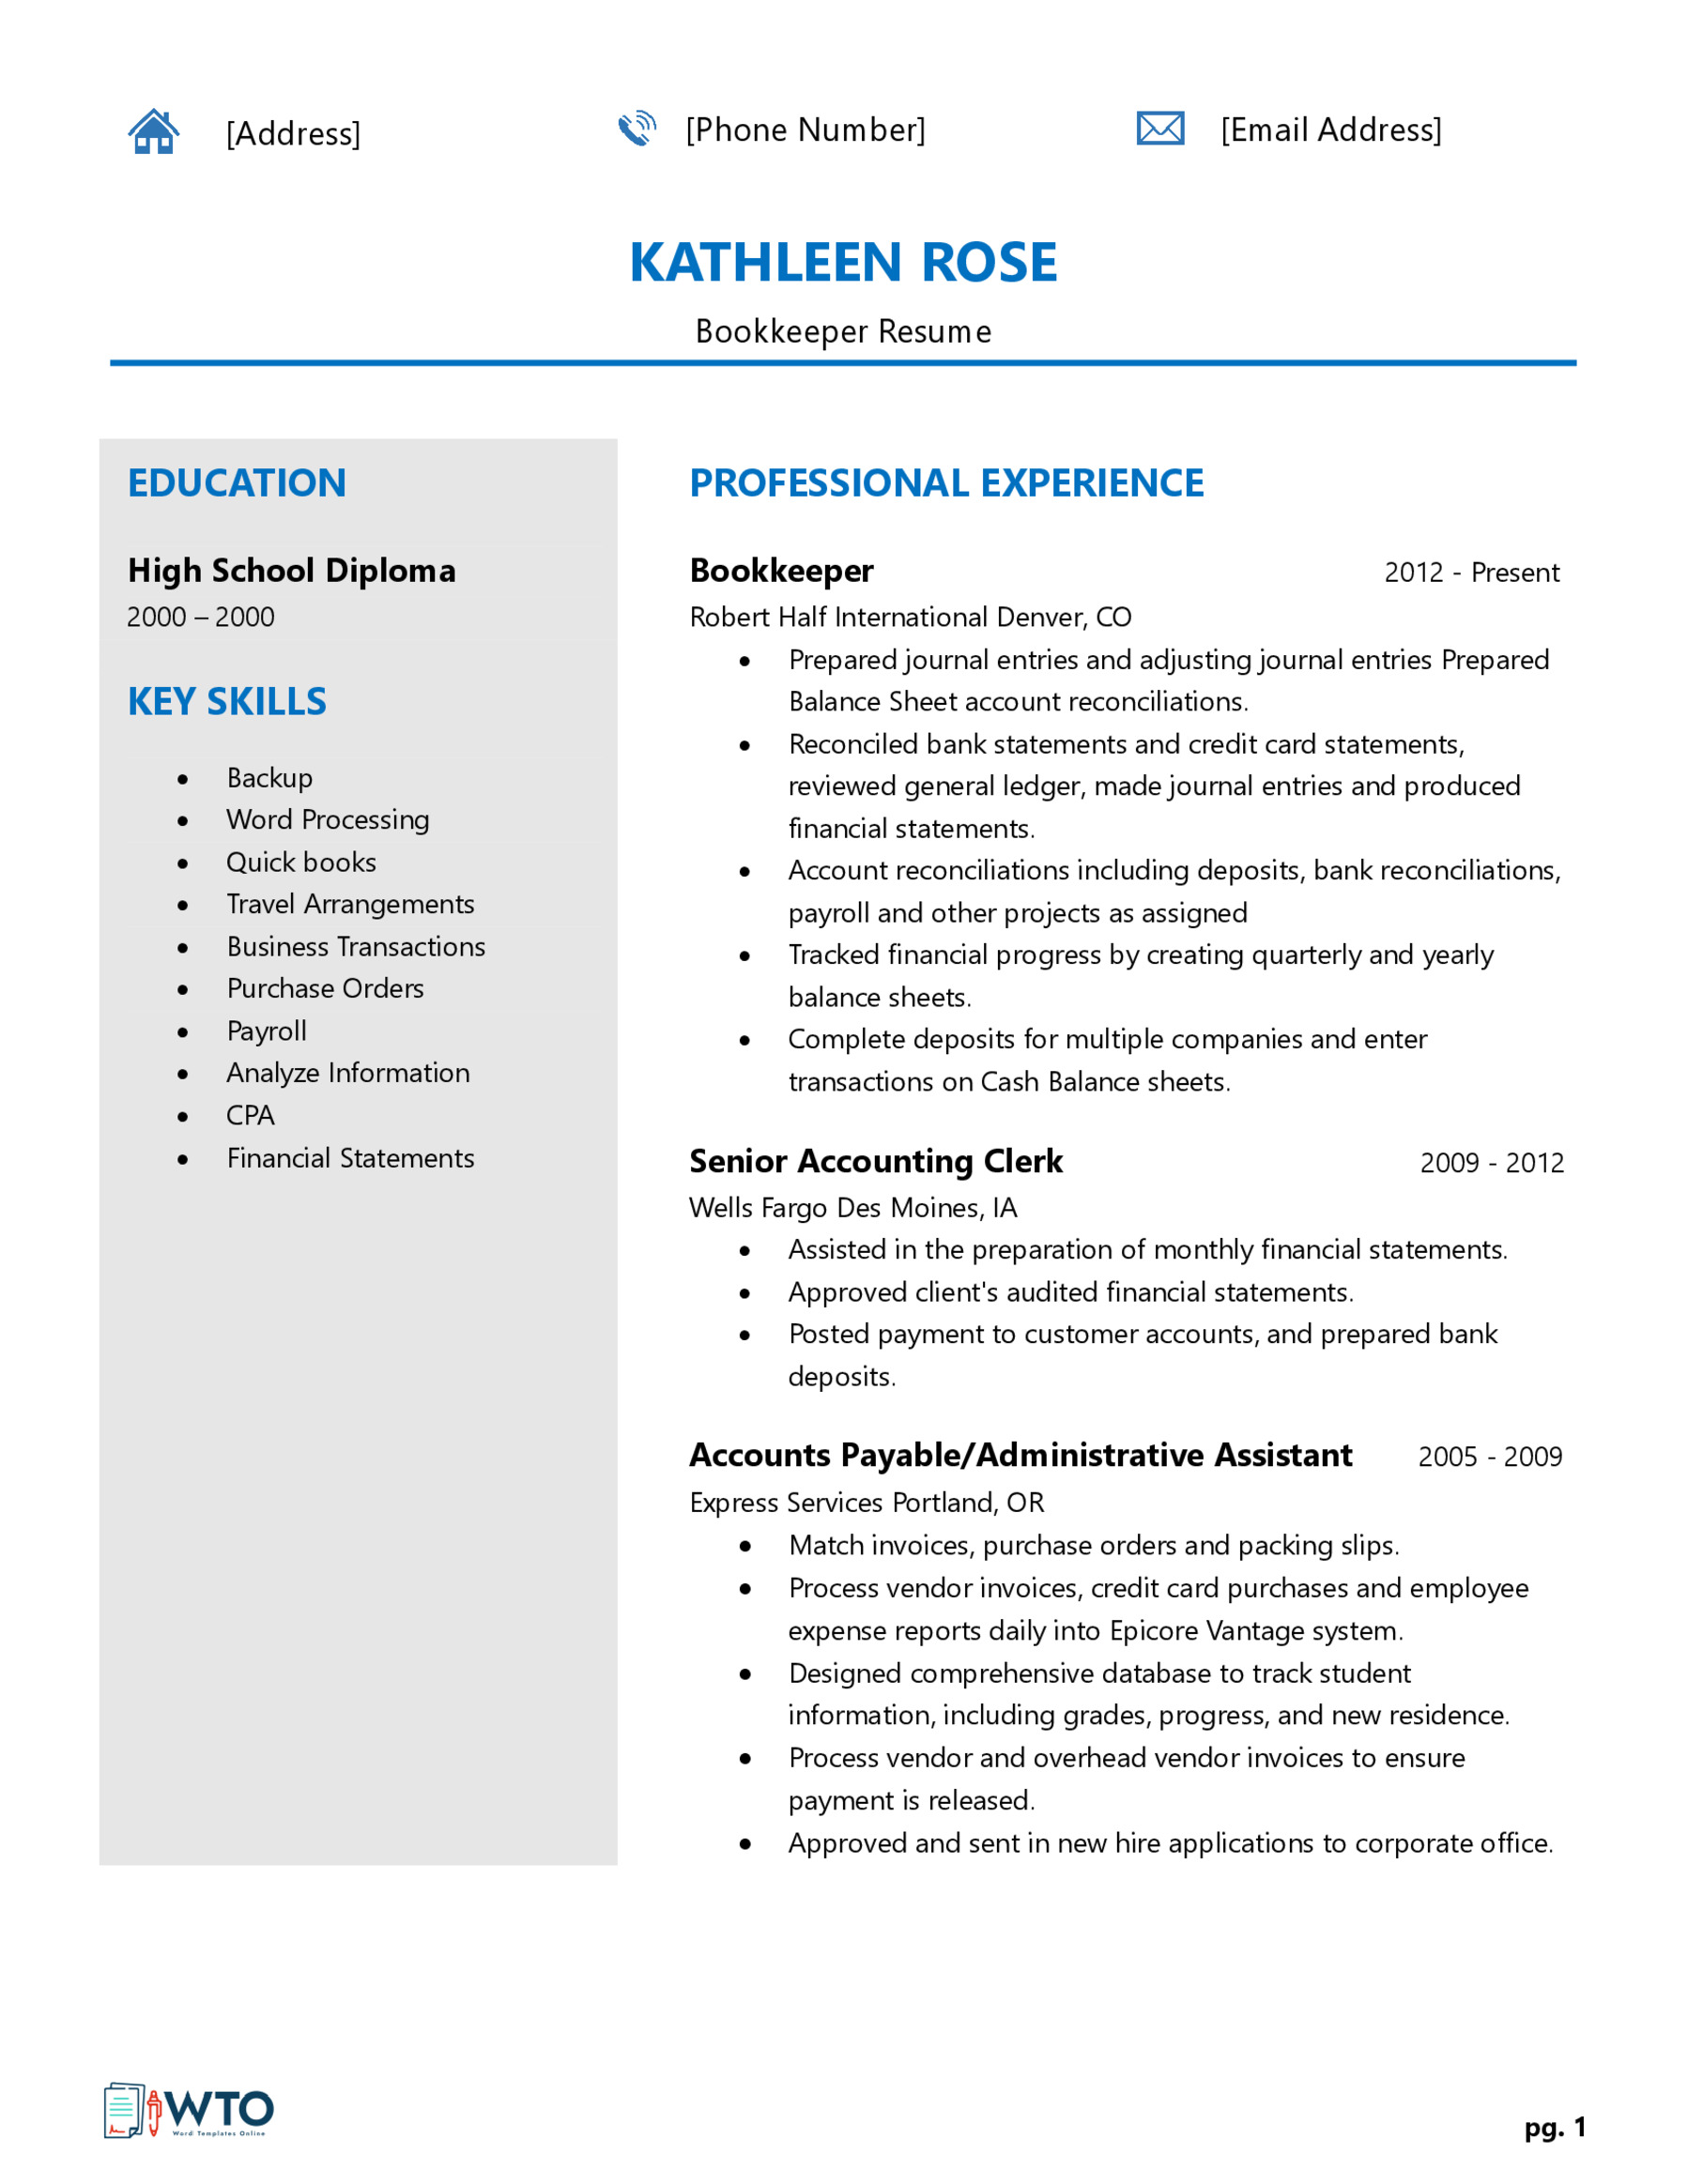 Bookkeeper Resume - Creative and Eye-catching Template